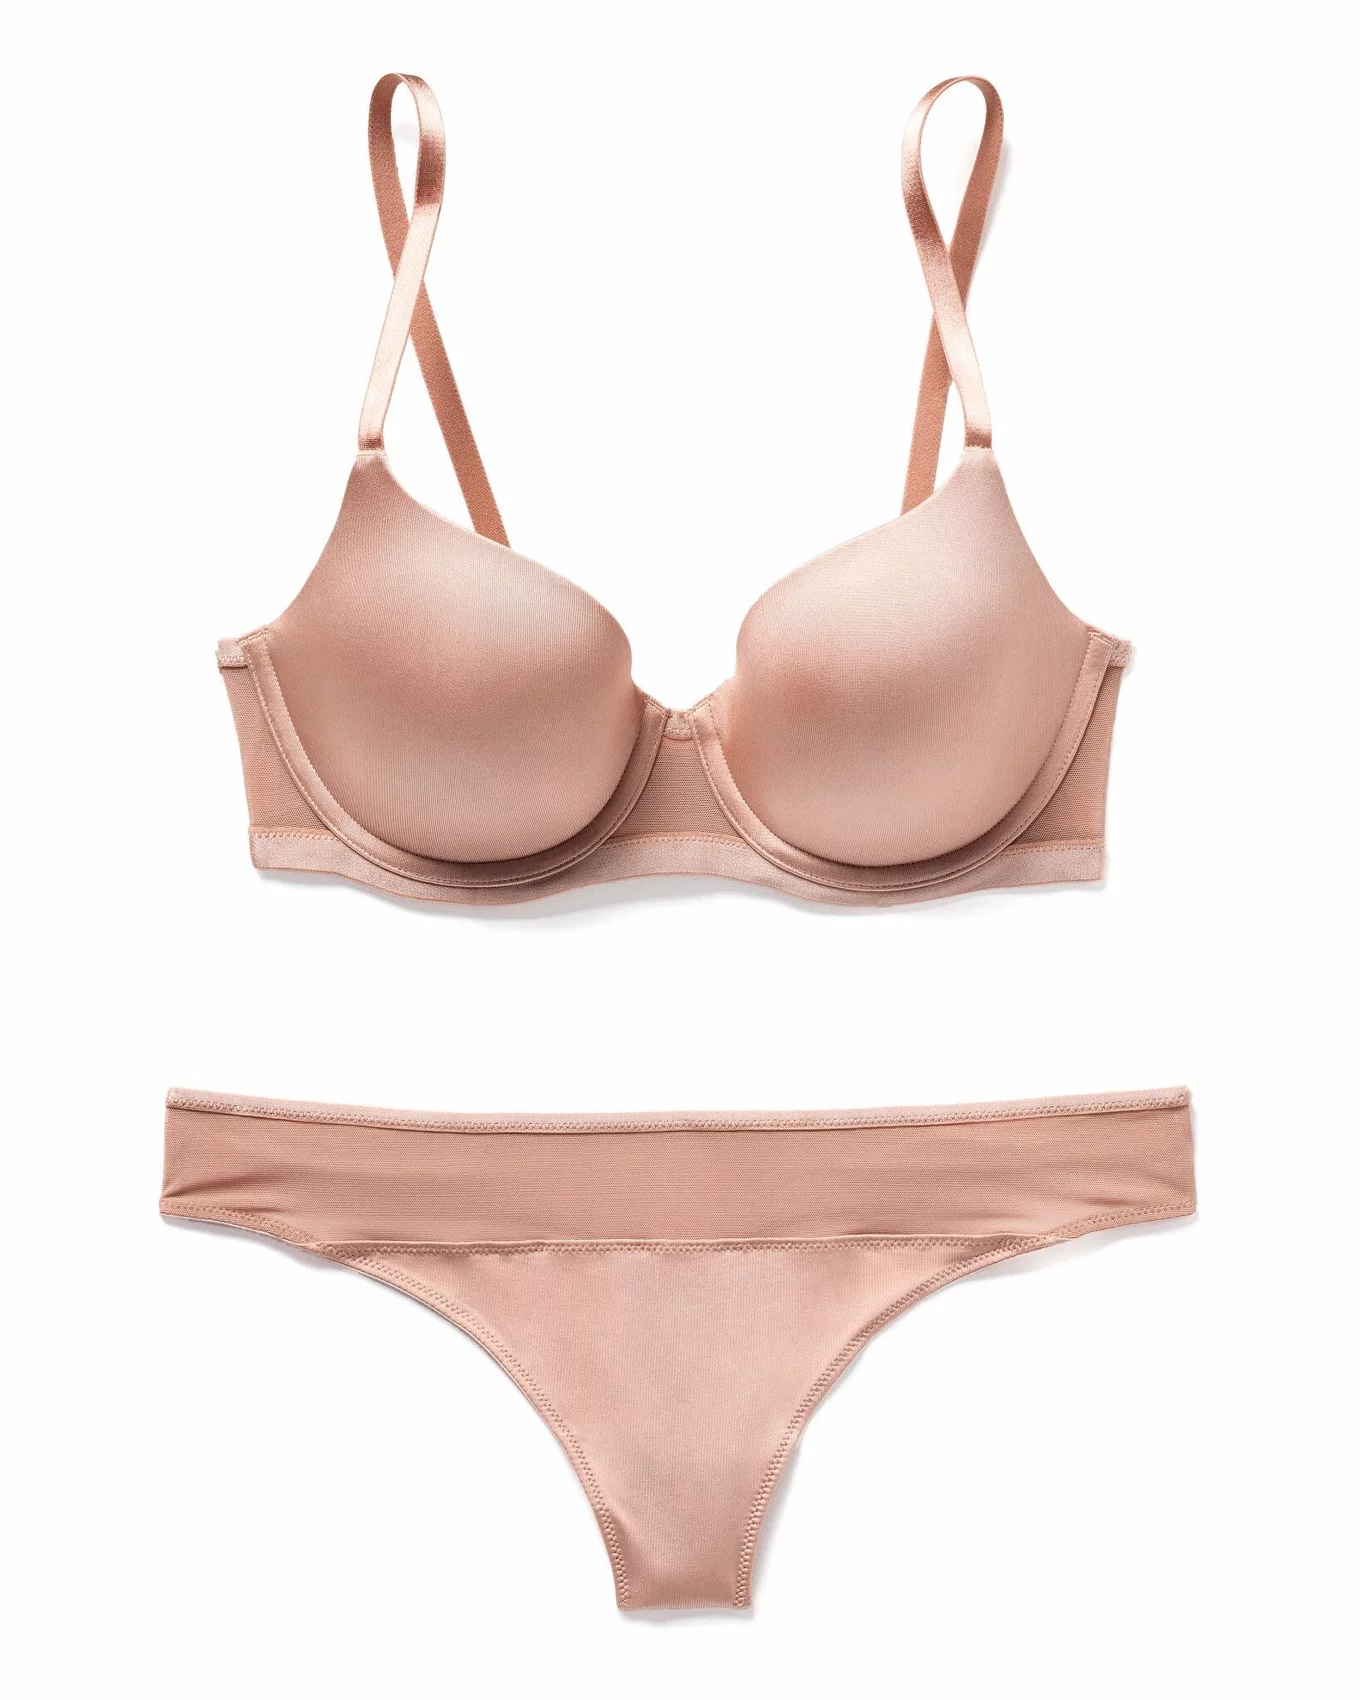 Adore Me Women's Analize Plunge Bra 30D / Tuscany Beige.